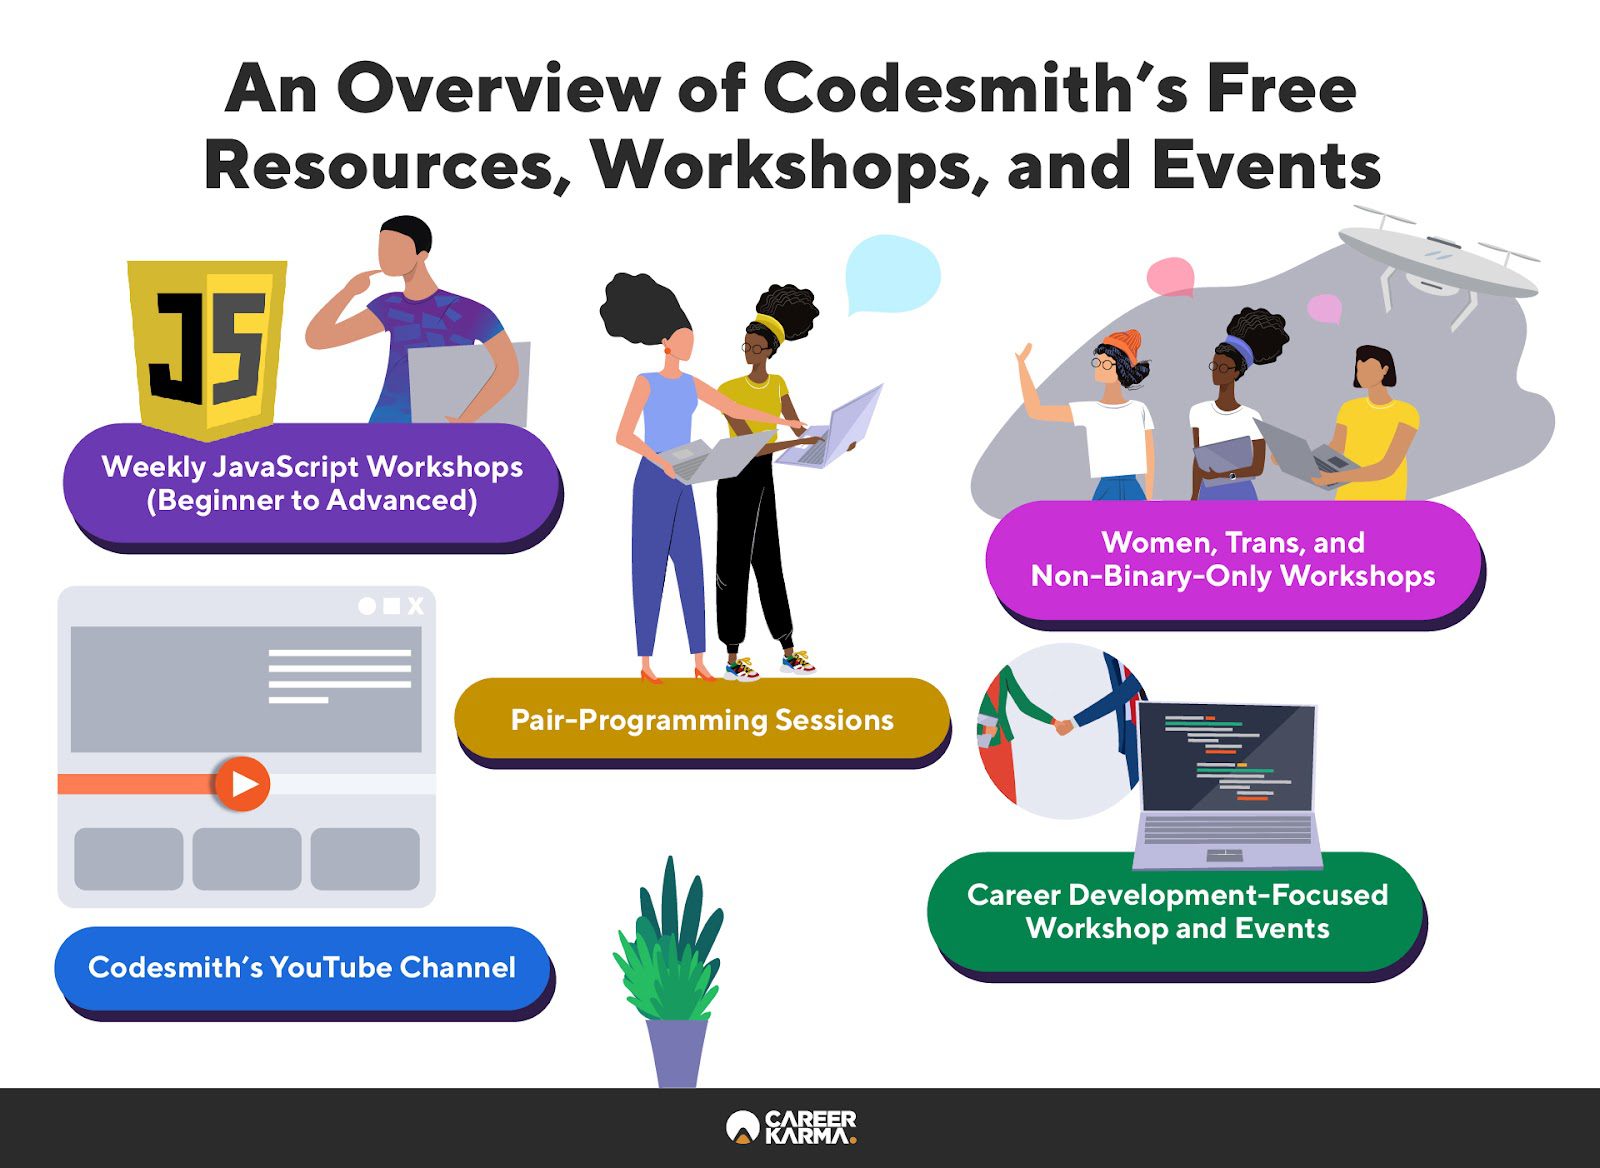 An infographic featuring Codesmith’s free online coding workshops and events